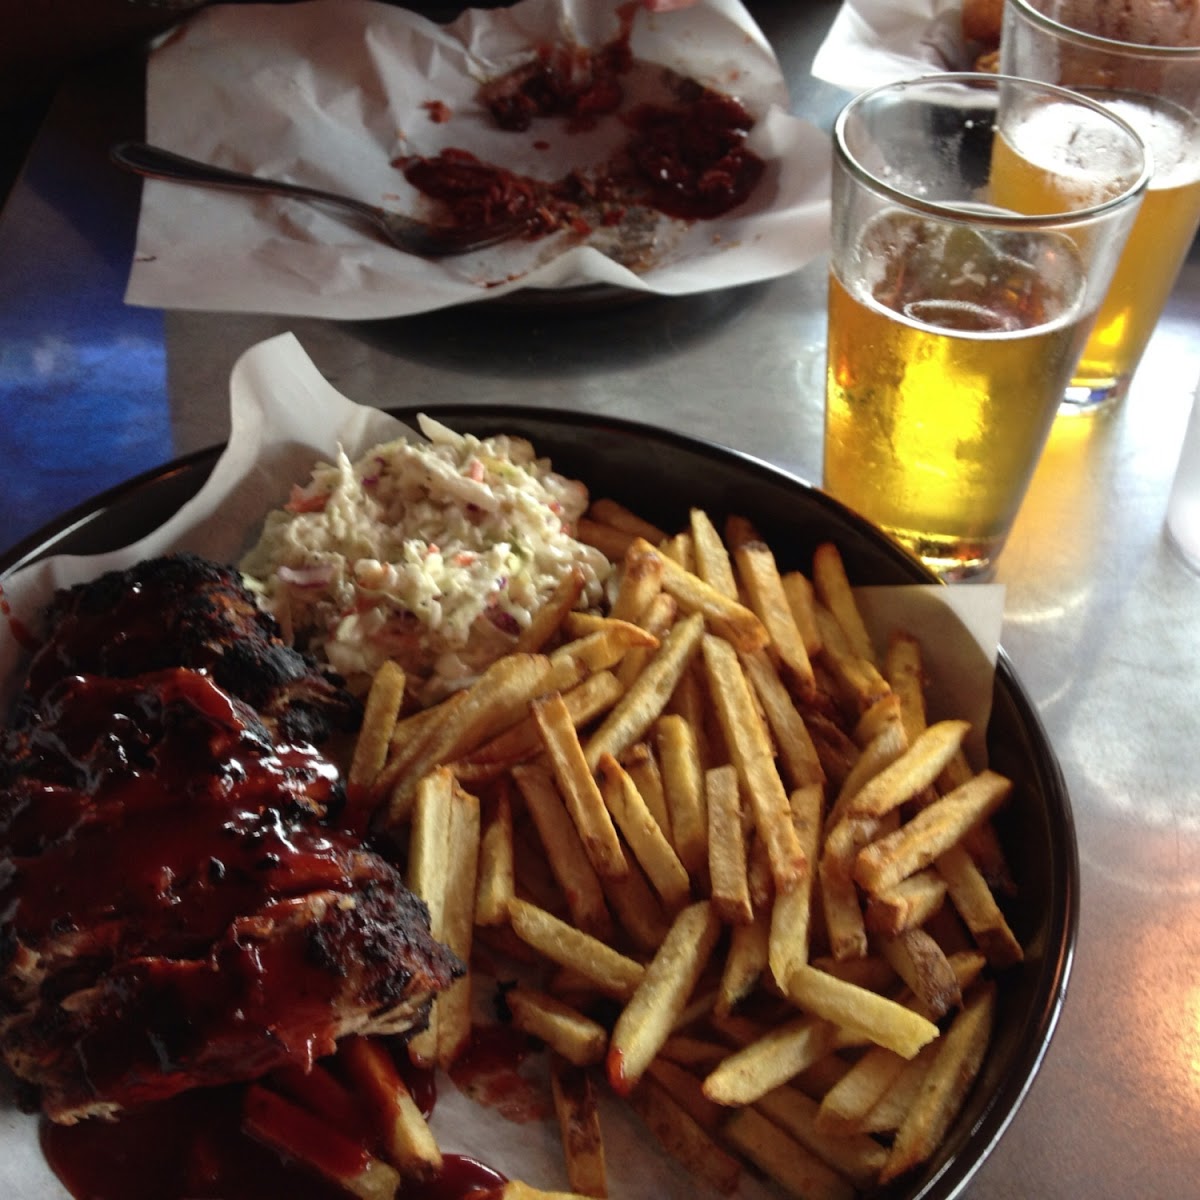 Ribs, fries, slaw and angry orchard cider!